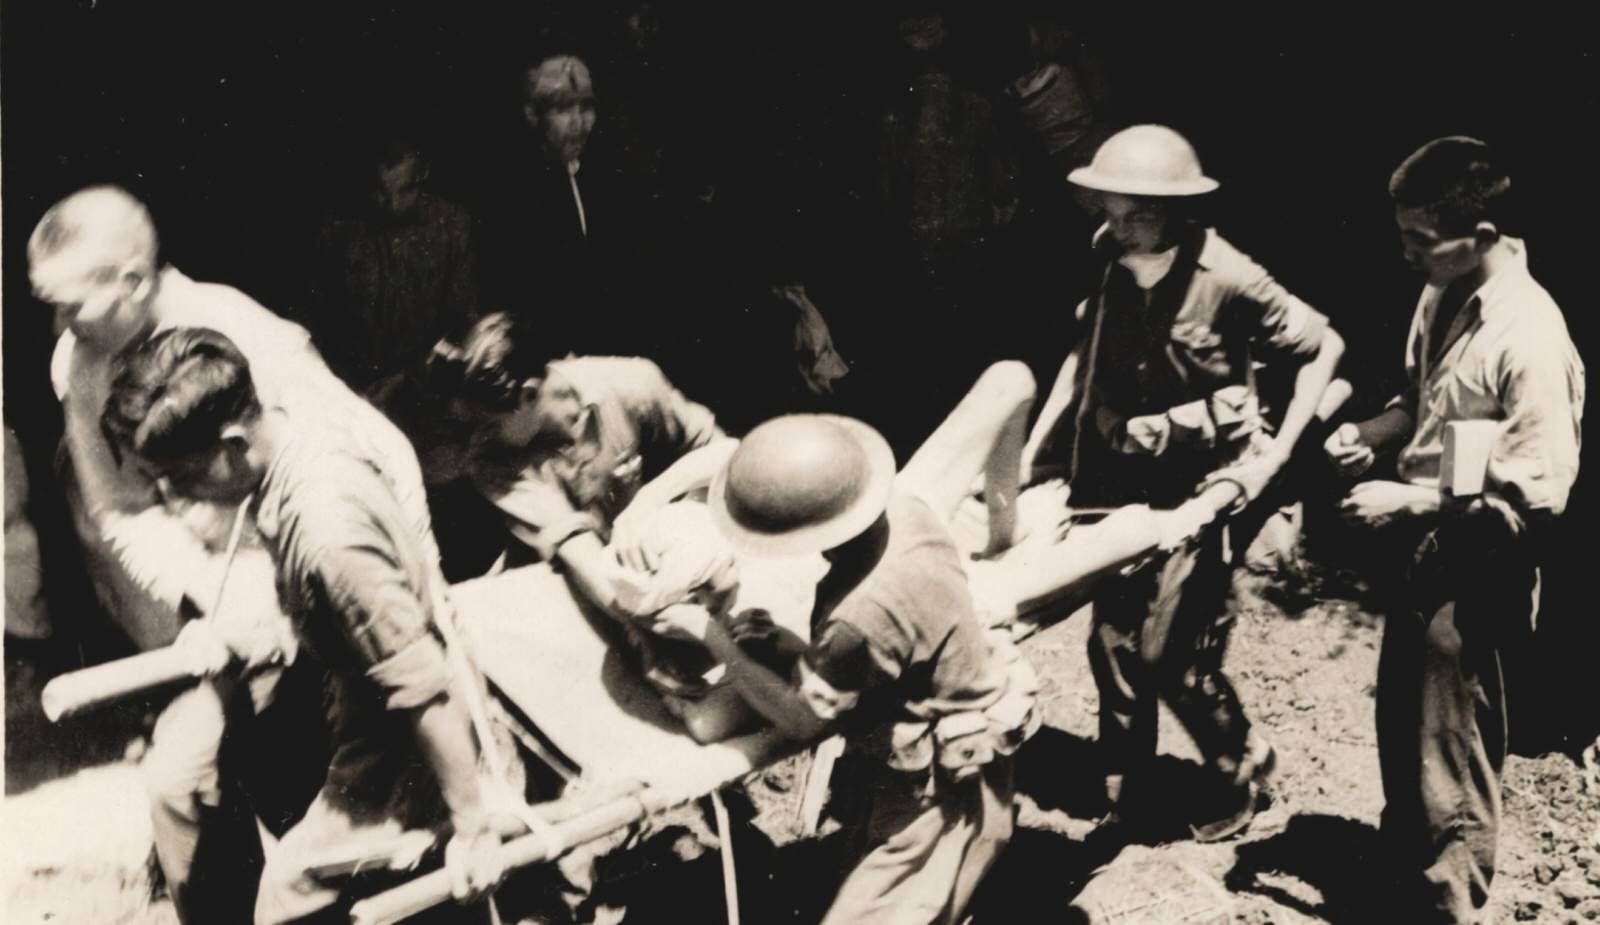 The wounded who could walk had gone into the hills as the planes approached. After the raid men formerly wounded at the front, were brought in again on stretchers to be operated upon. 1937-1940